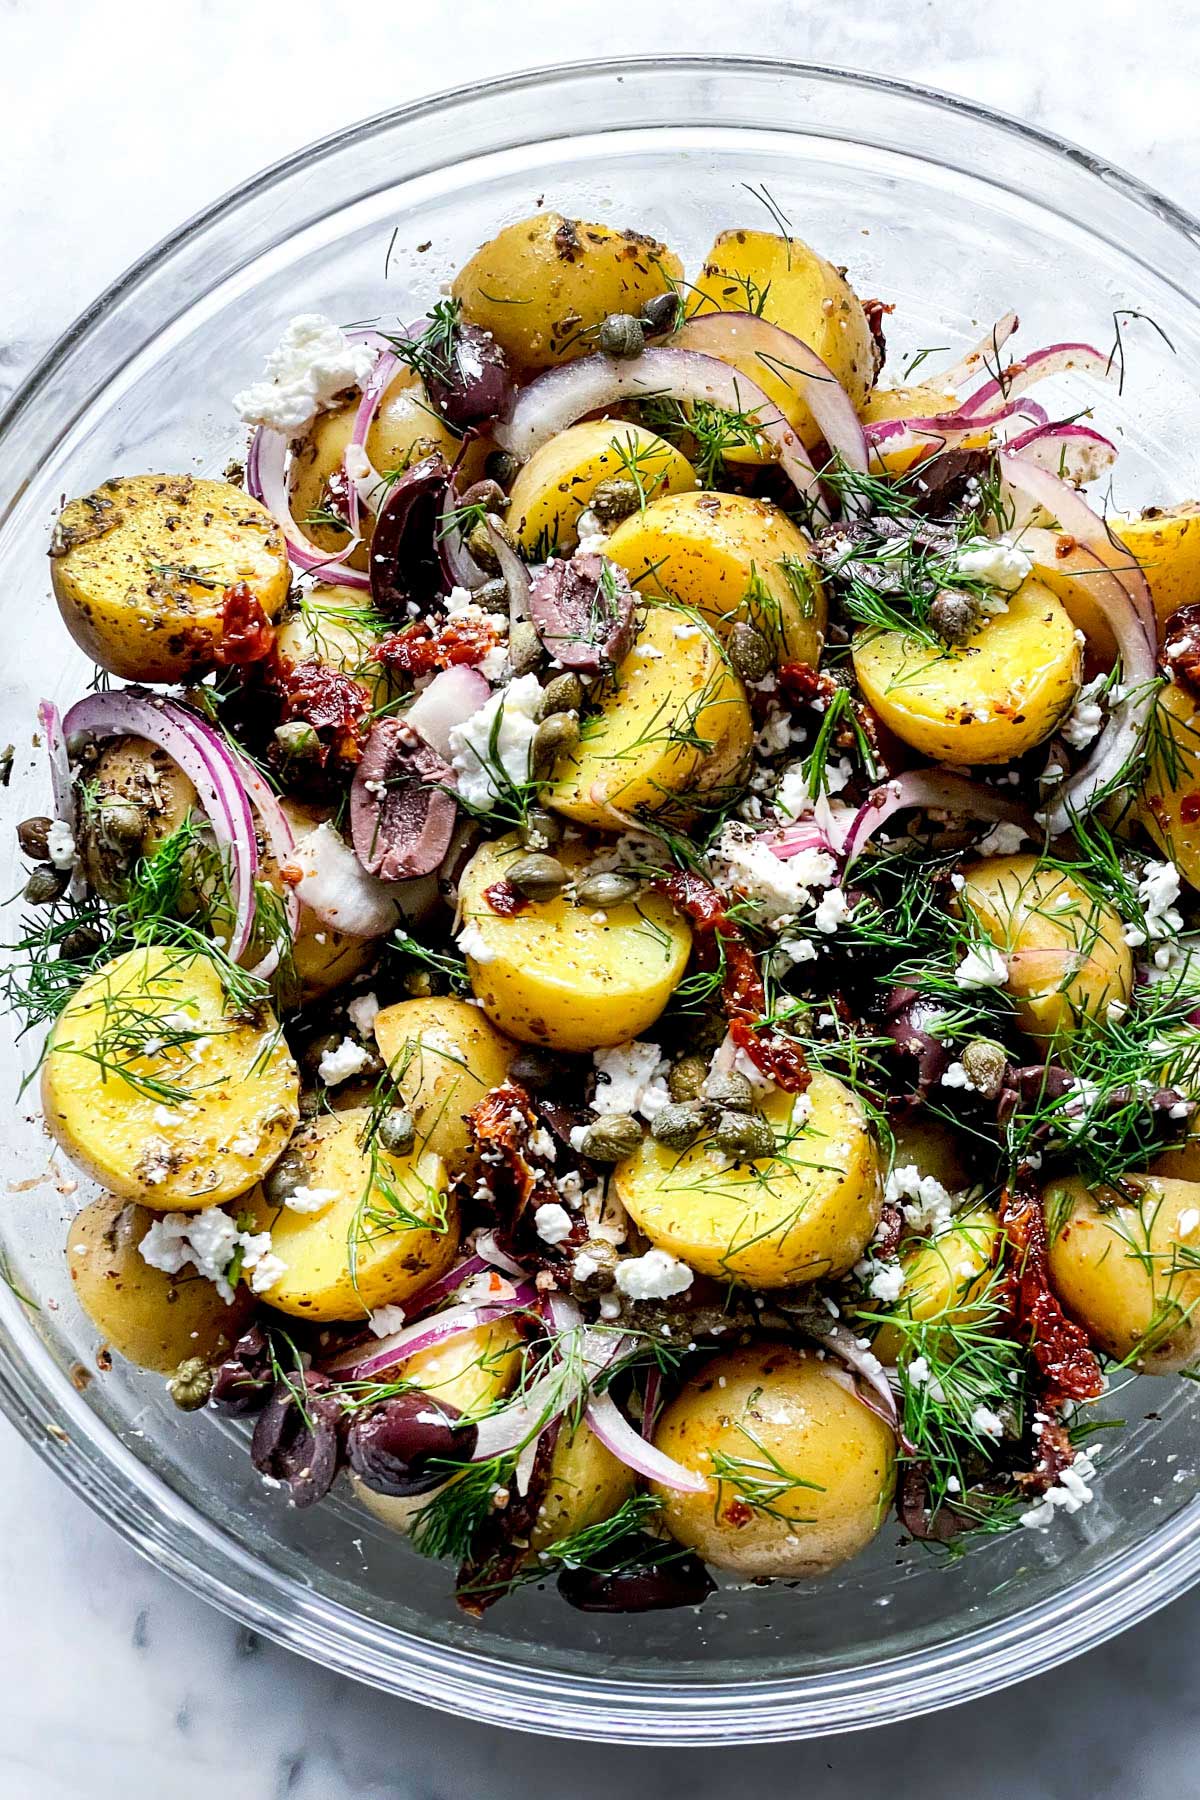 Mustard Greens Salad with Roasted Potatoes and Tomatoes - Eating